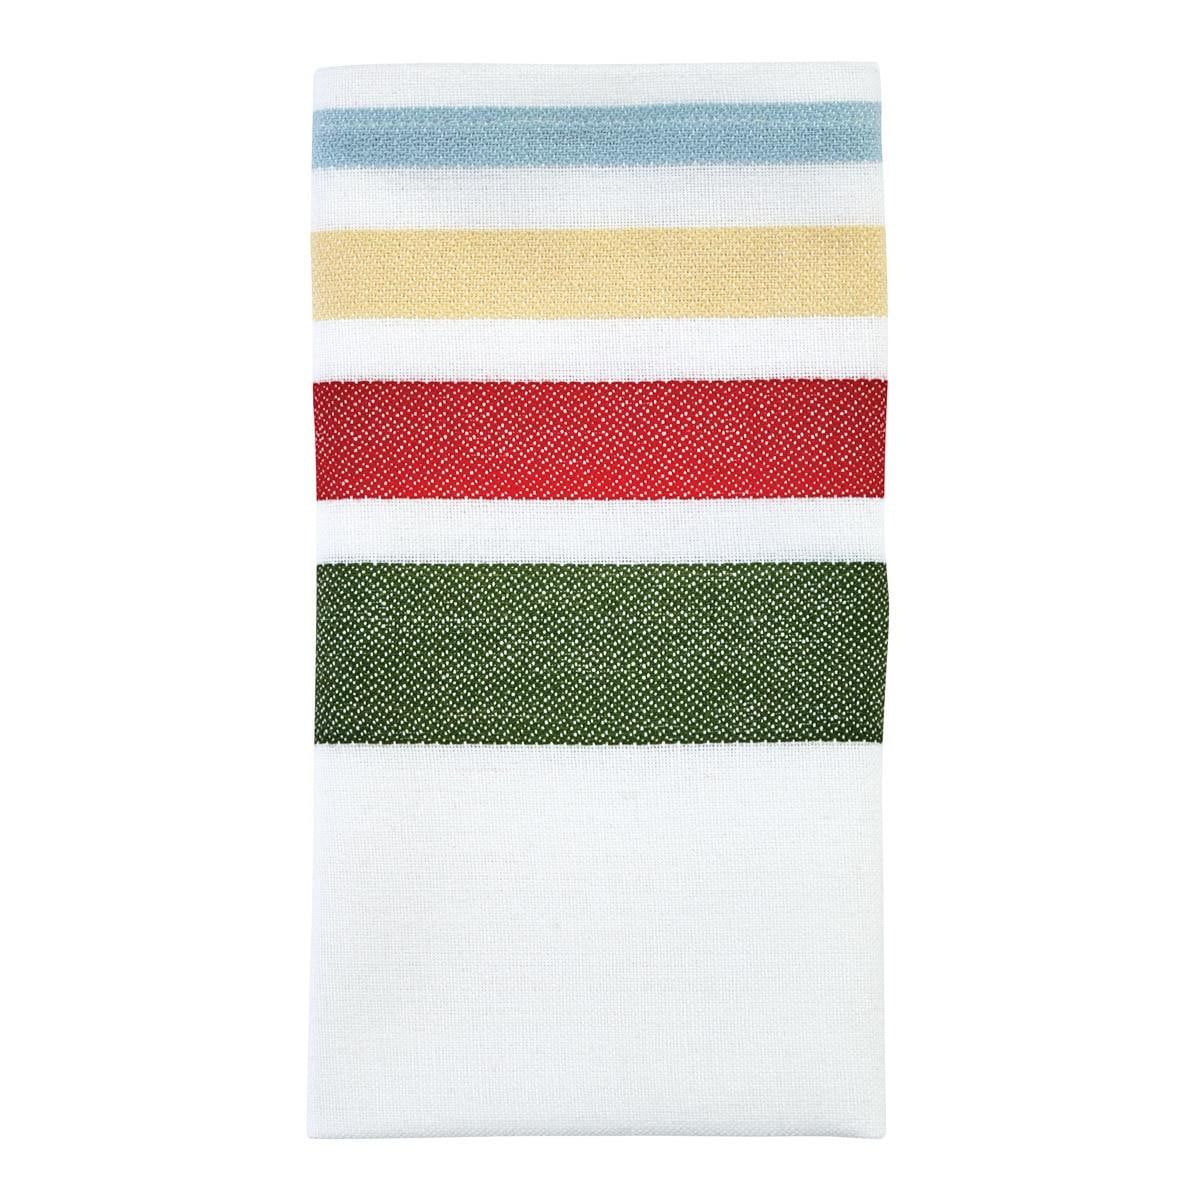 Park Designs Camp Stripe Napkins - Set of 6  USD$30.99You save $0.00     Price when purchased onl... | Walmart (US)